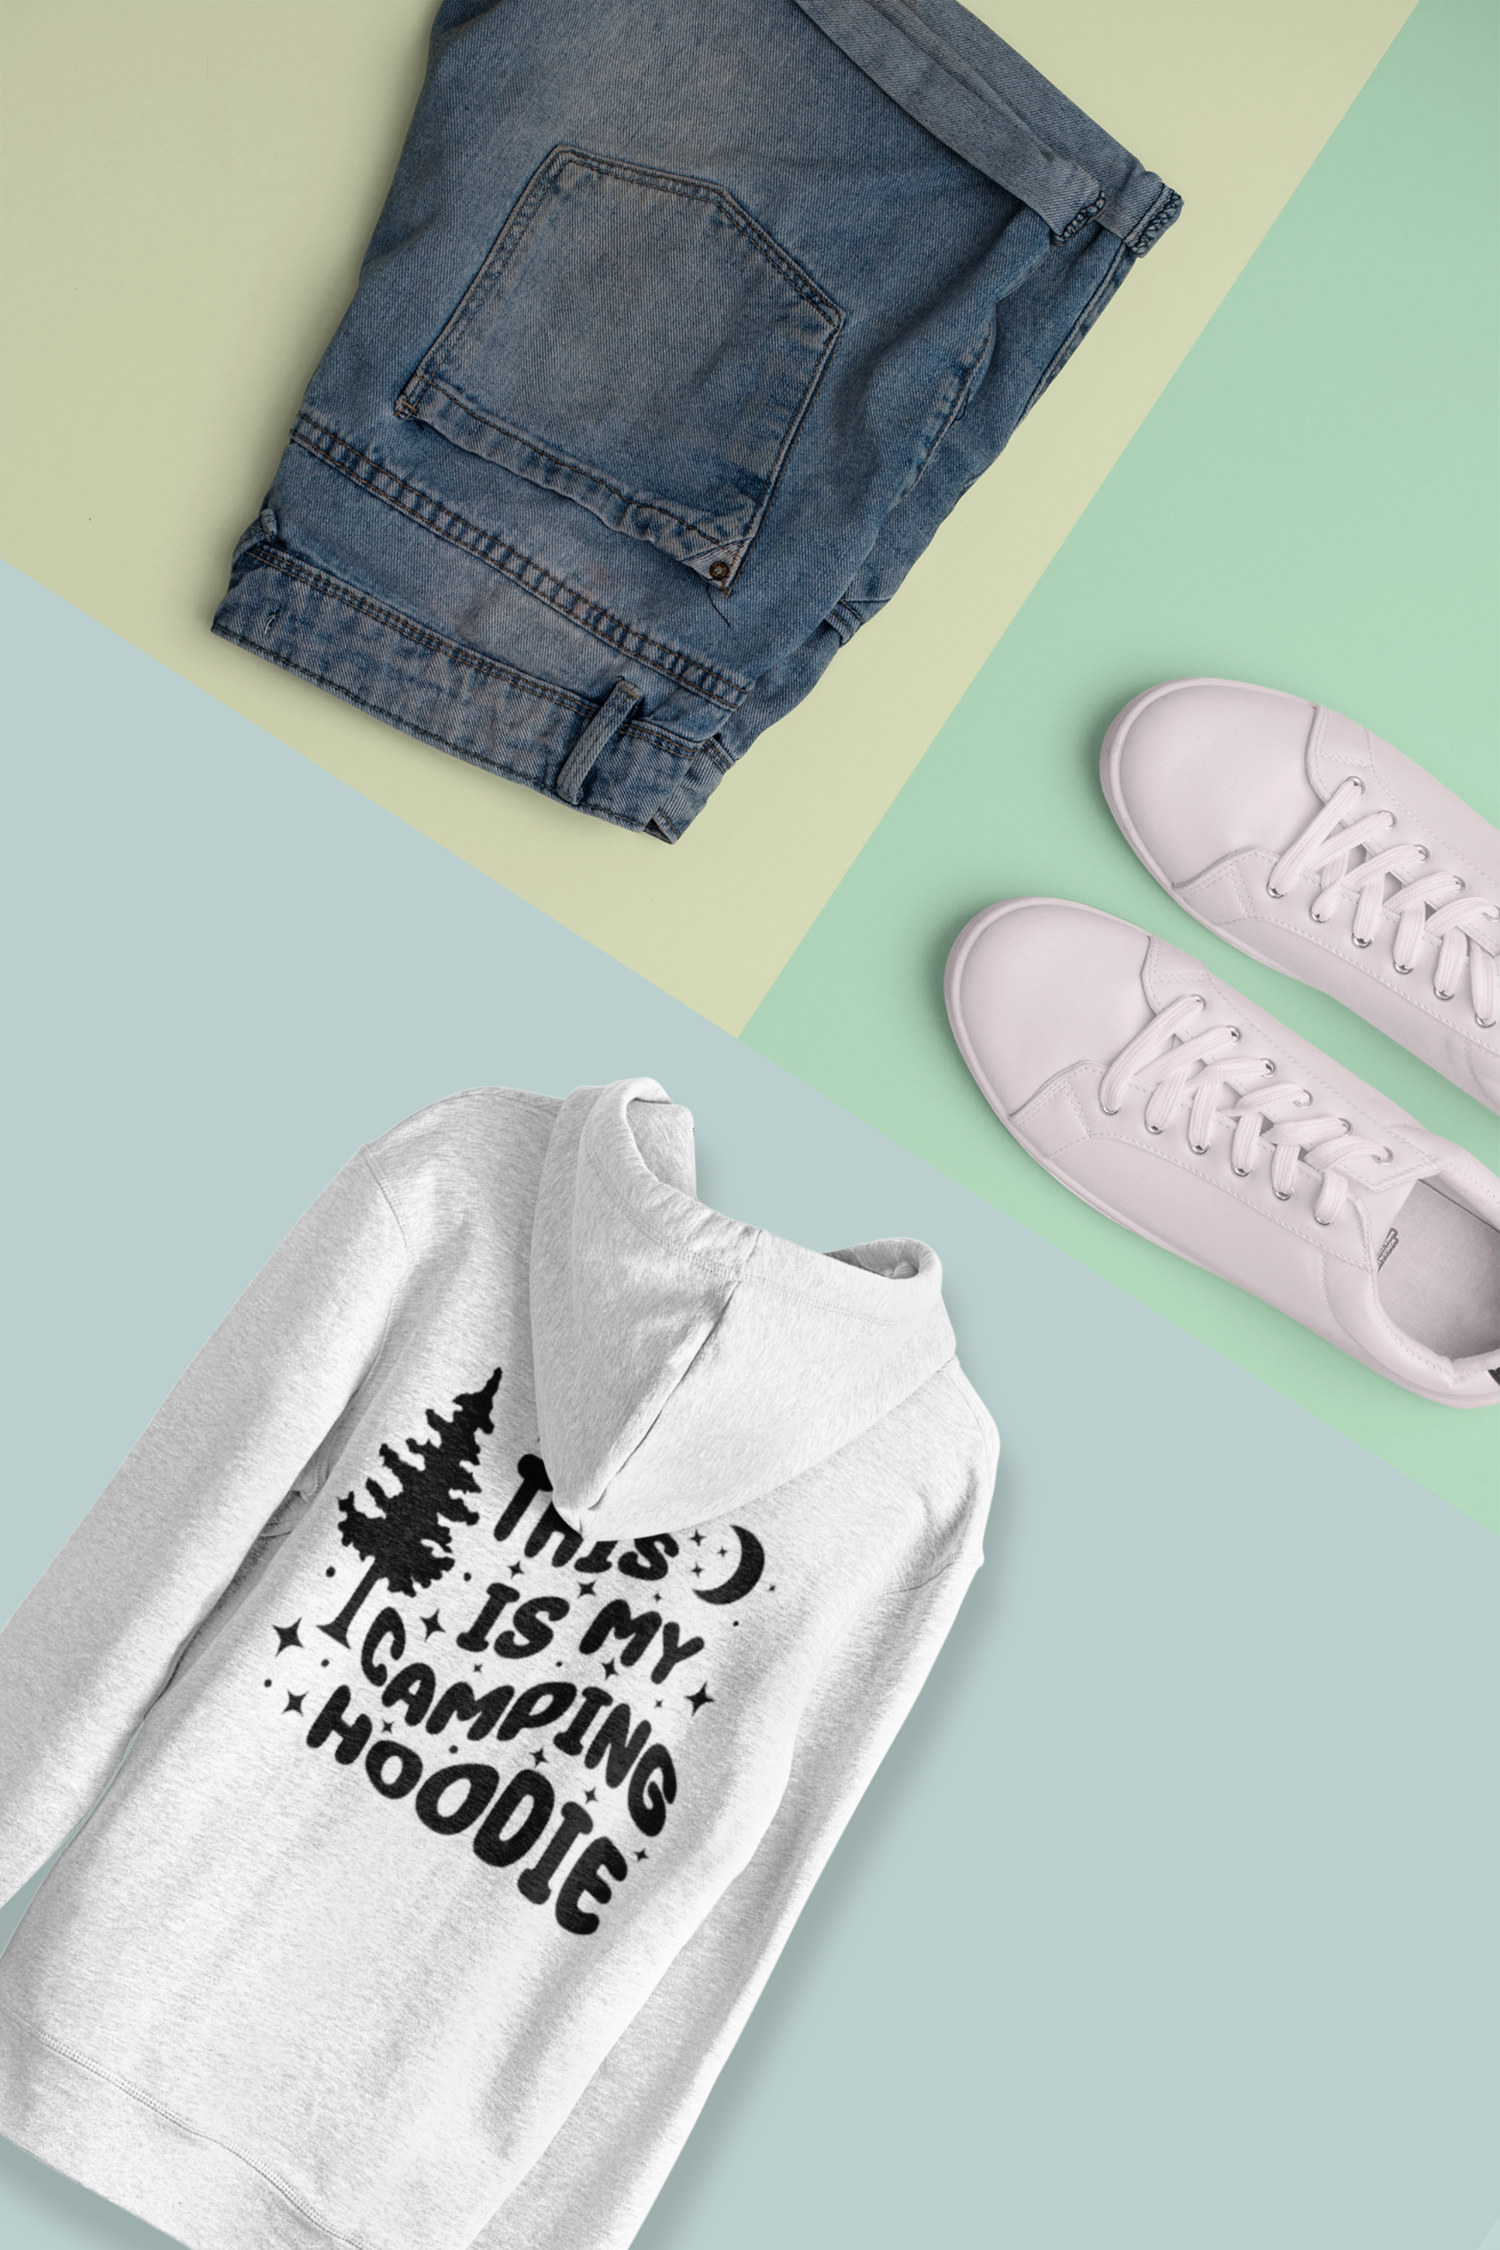 Casual camping outfit display featuring stylish hoodie, jean shorts, and sneakers laid out on a soft mint colours background, perfect for outdoor adventures